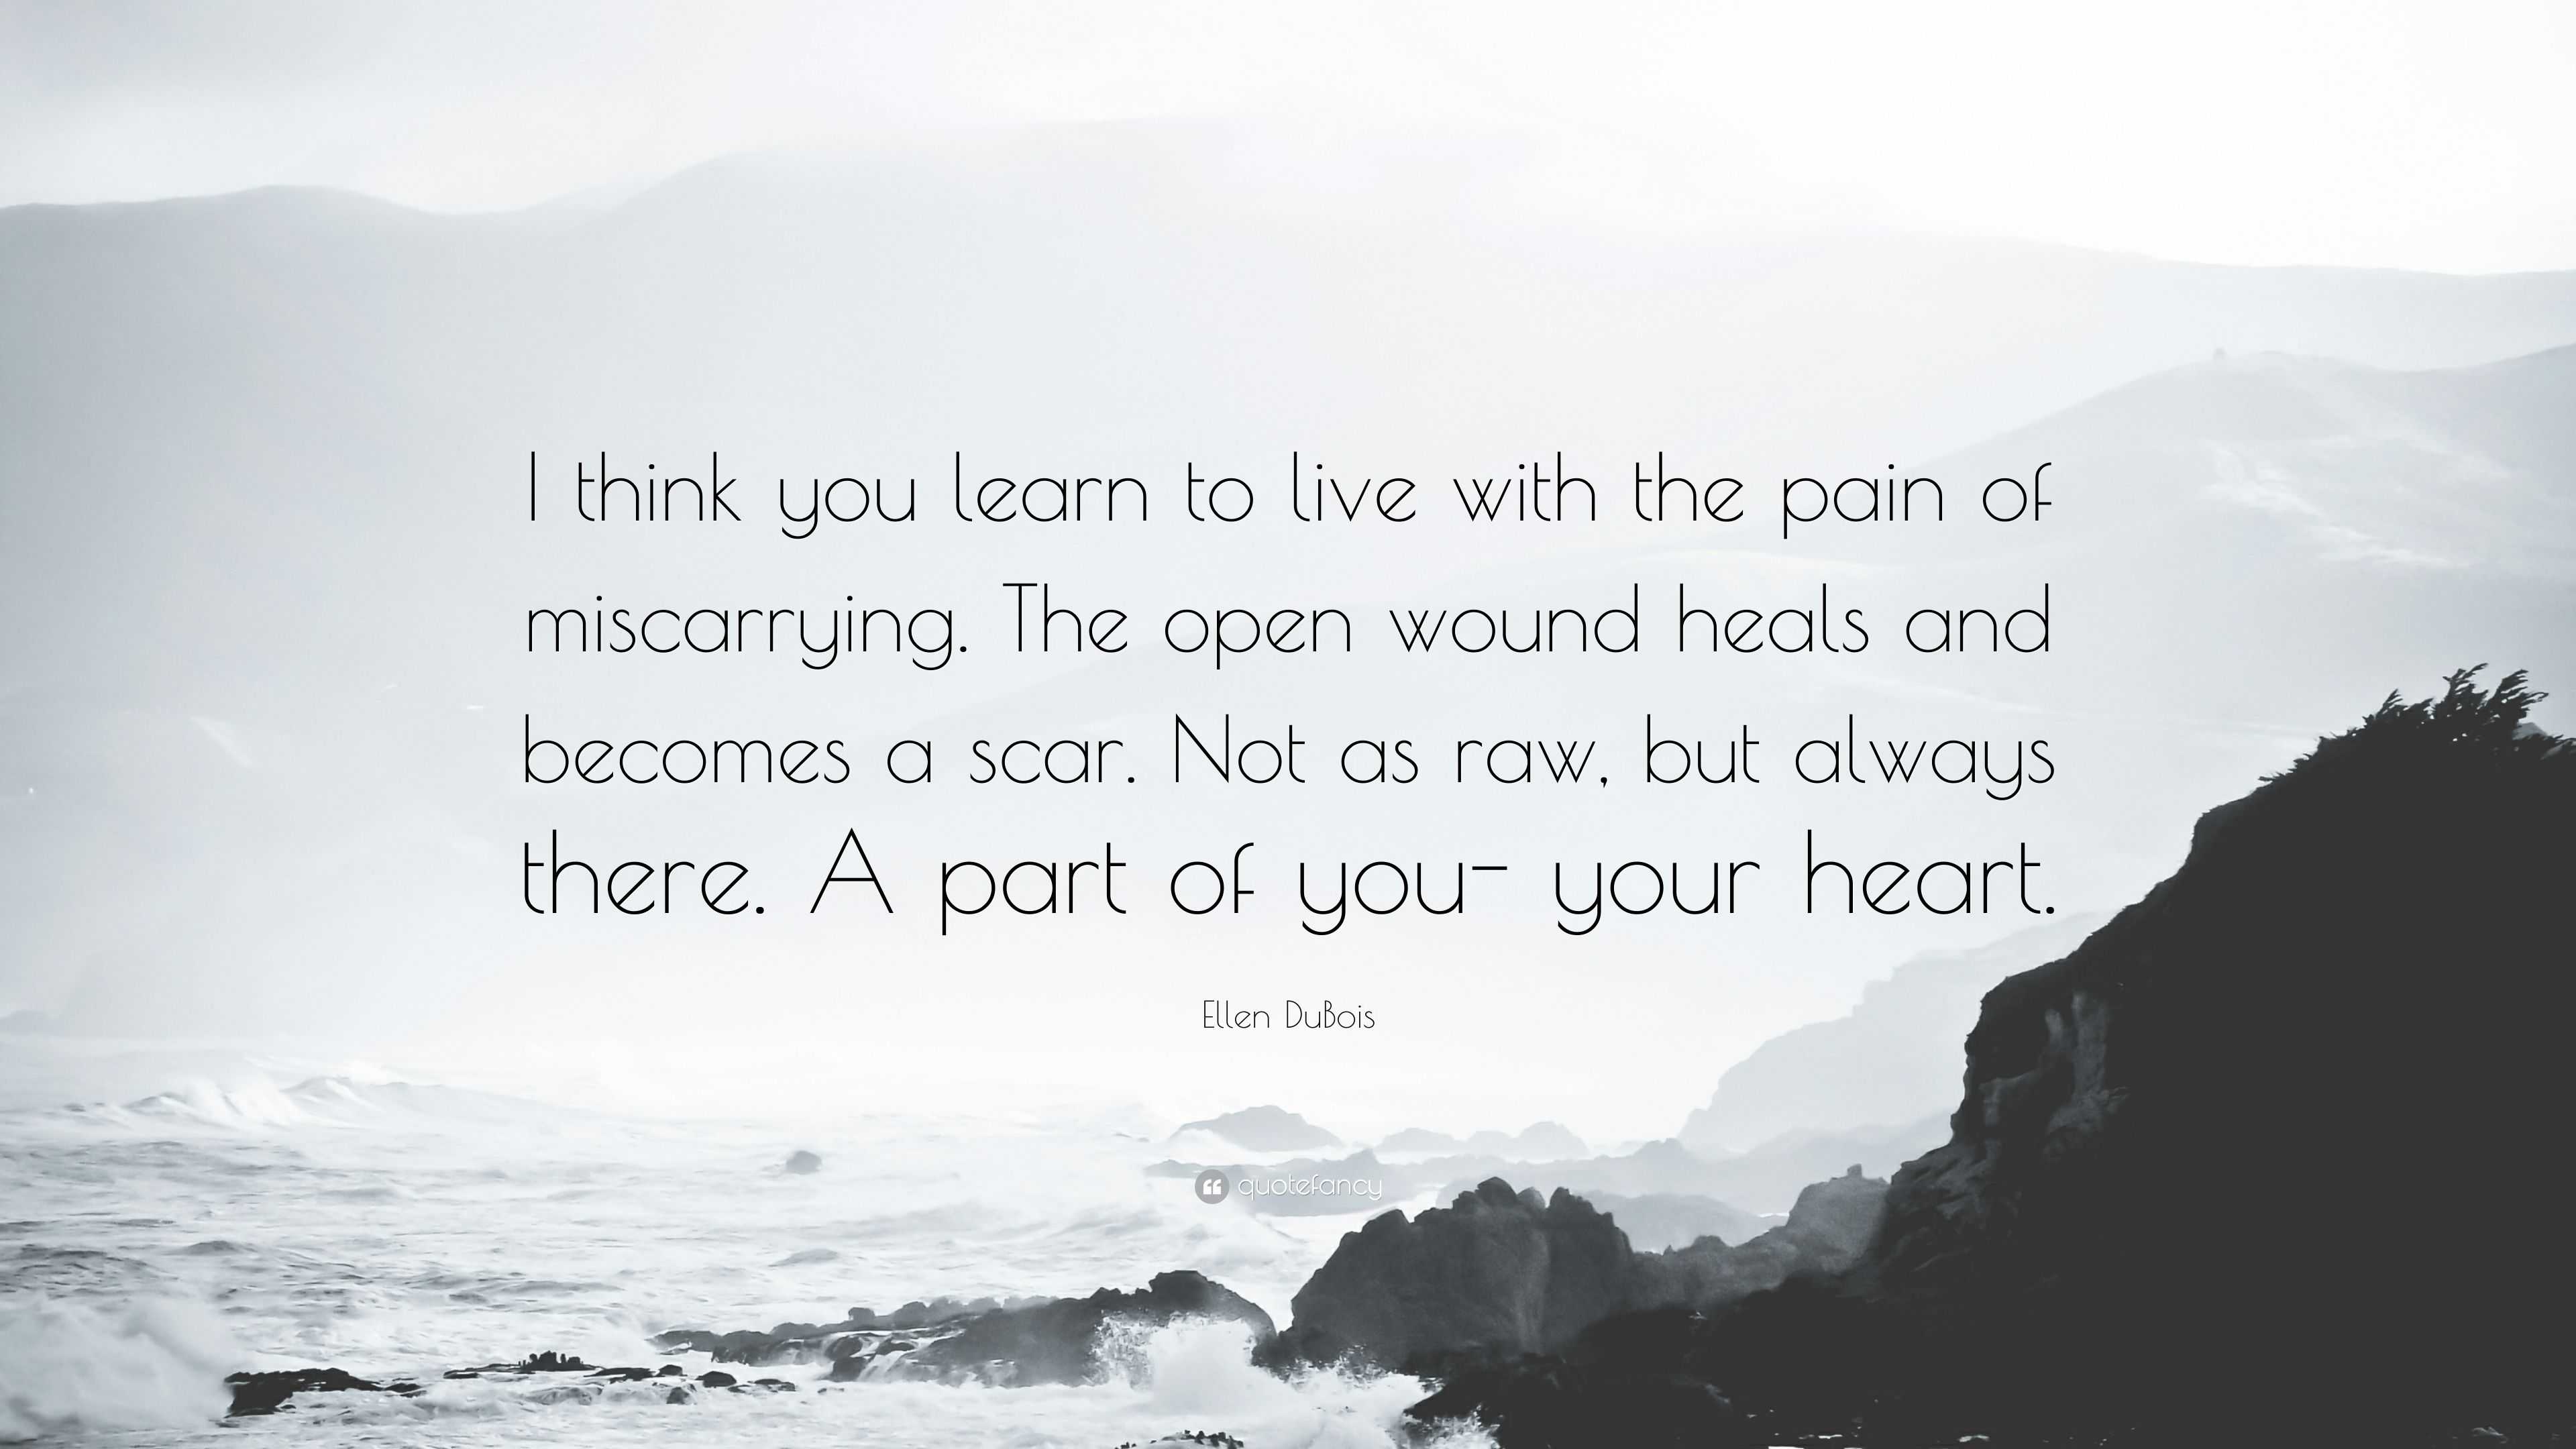 Ellen DuBois Quote “I think you learn to live with the pain of miscarrying